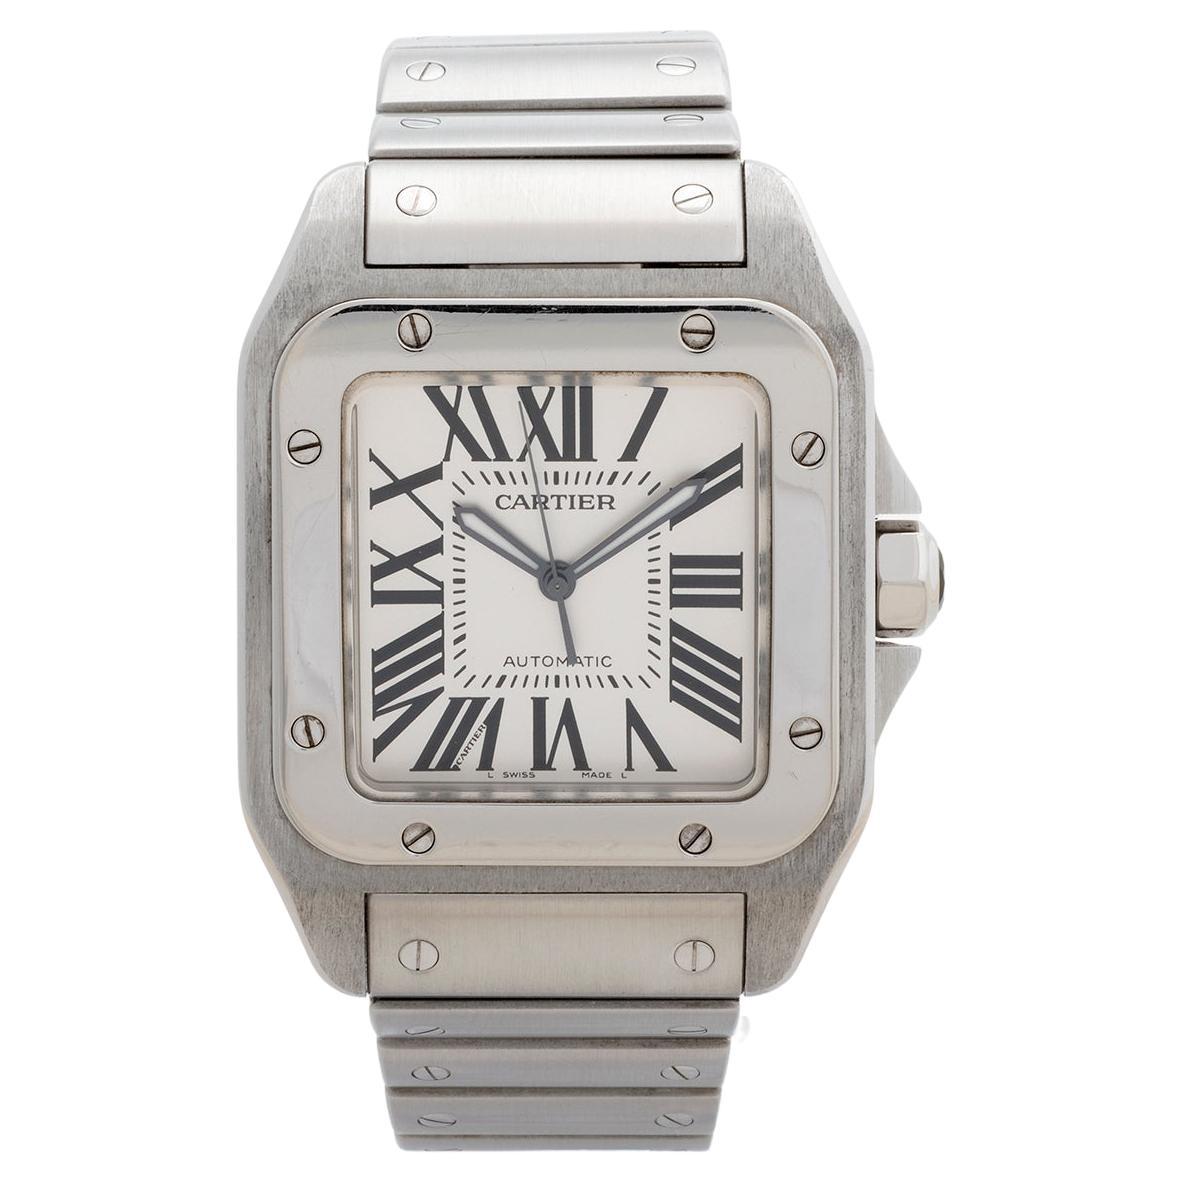 Our Cartier Santos 100 reference 2656 is the XL version featuring a 38mm x 51mm stainless steel case with stainless steel bracelet. Presented in outstanding condition, this is one of the best Santos 100 we have handled. In addition, this example